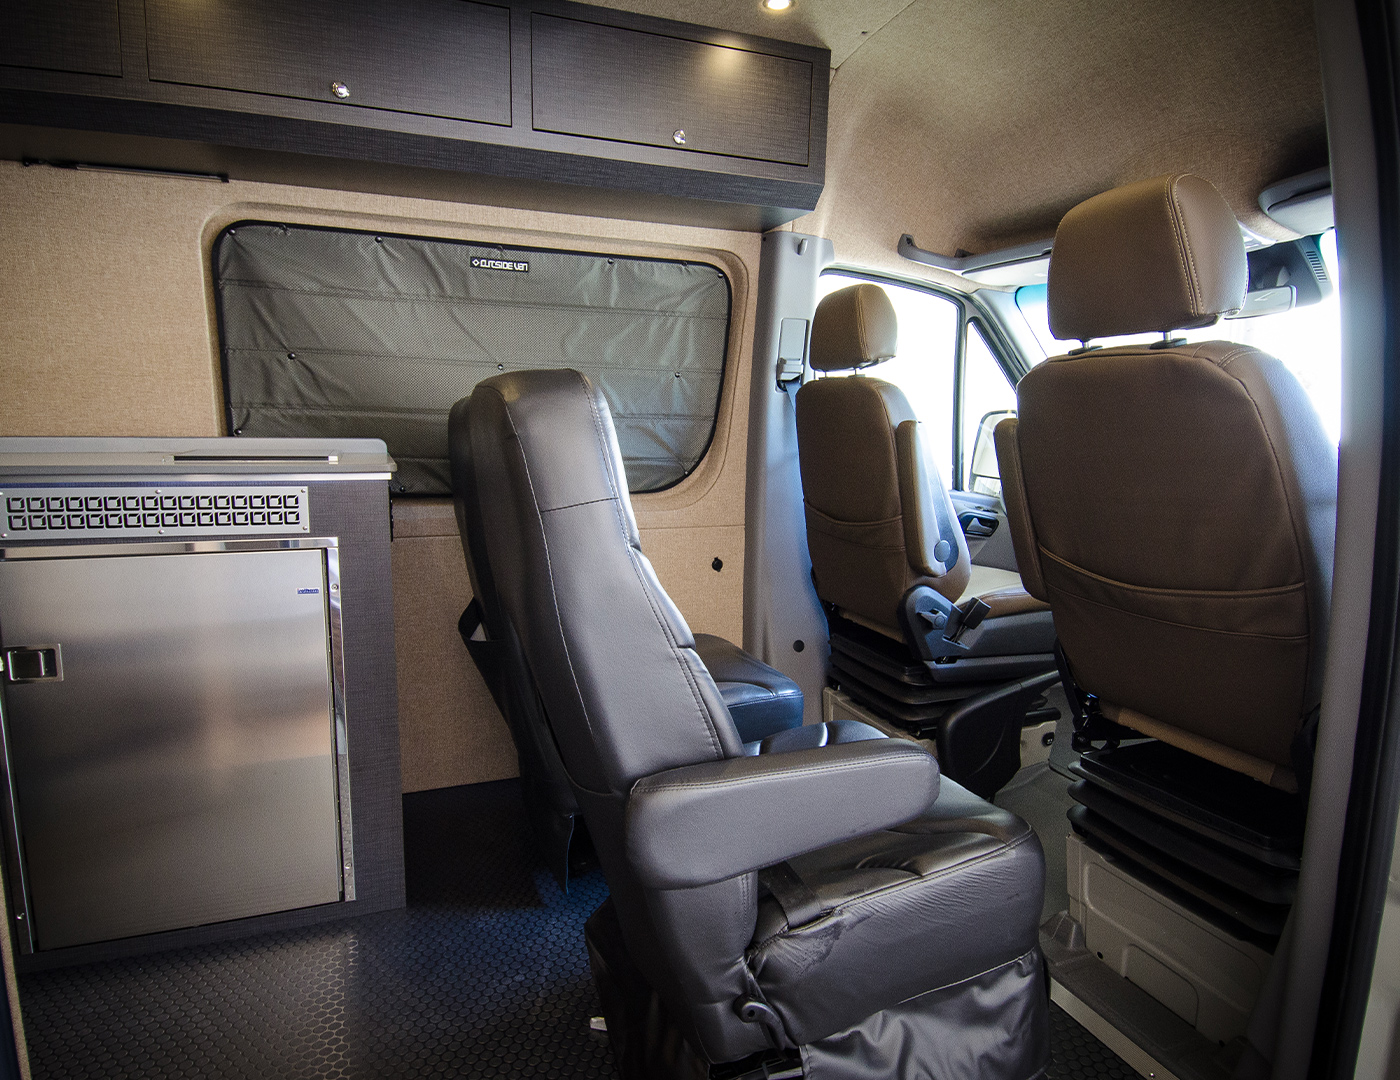 outside van that is luxury travel vehicle that is ready to sleep shower and travel in style